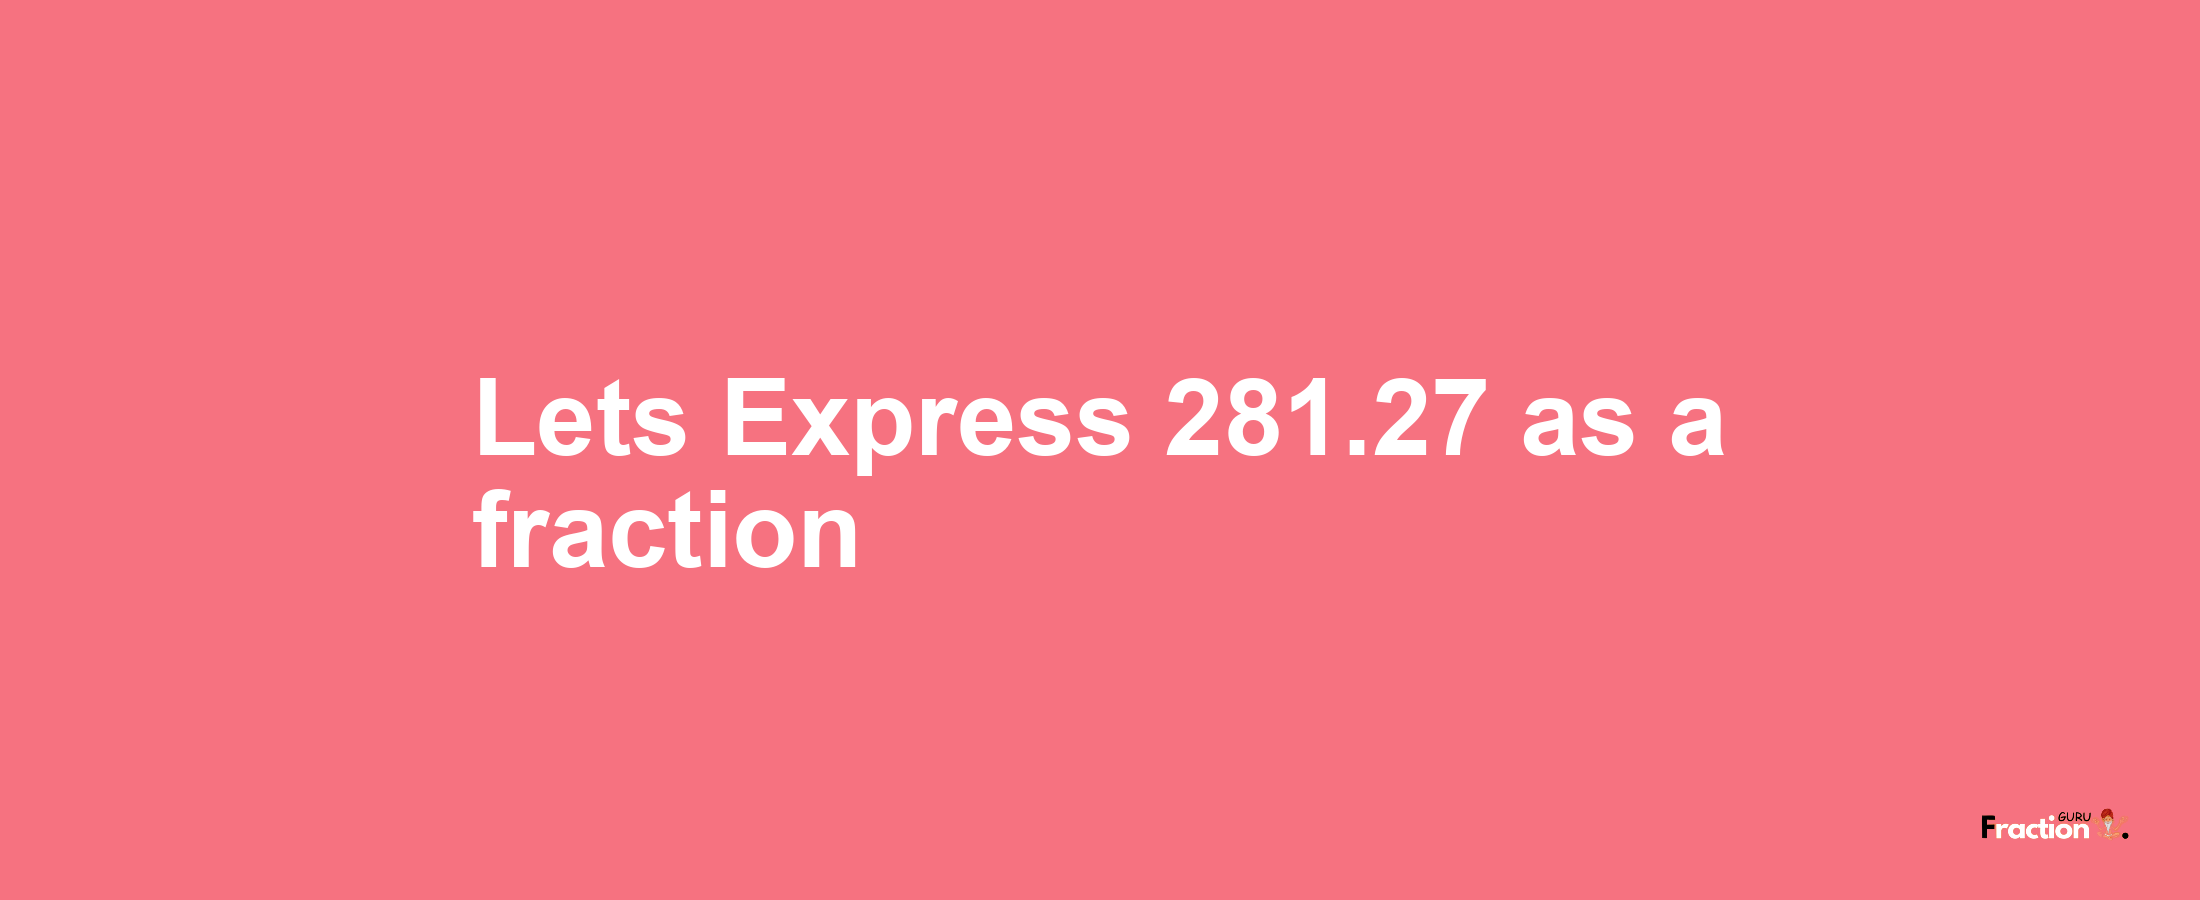 Lets Express 281.27 as afraction